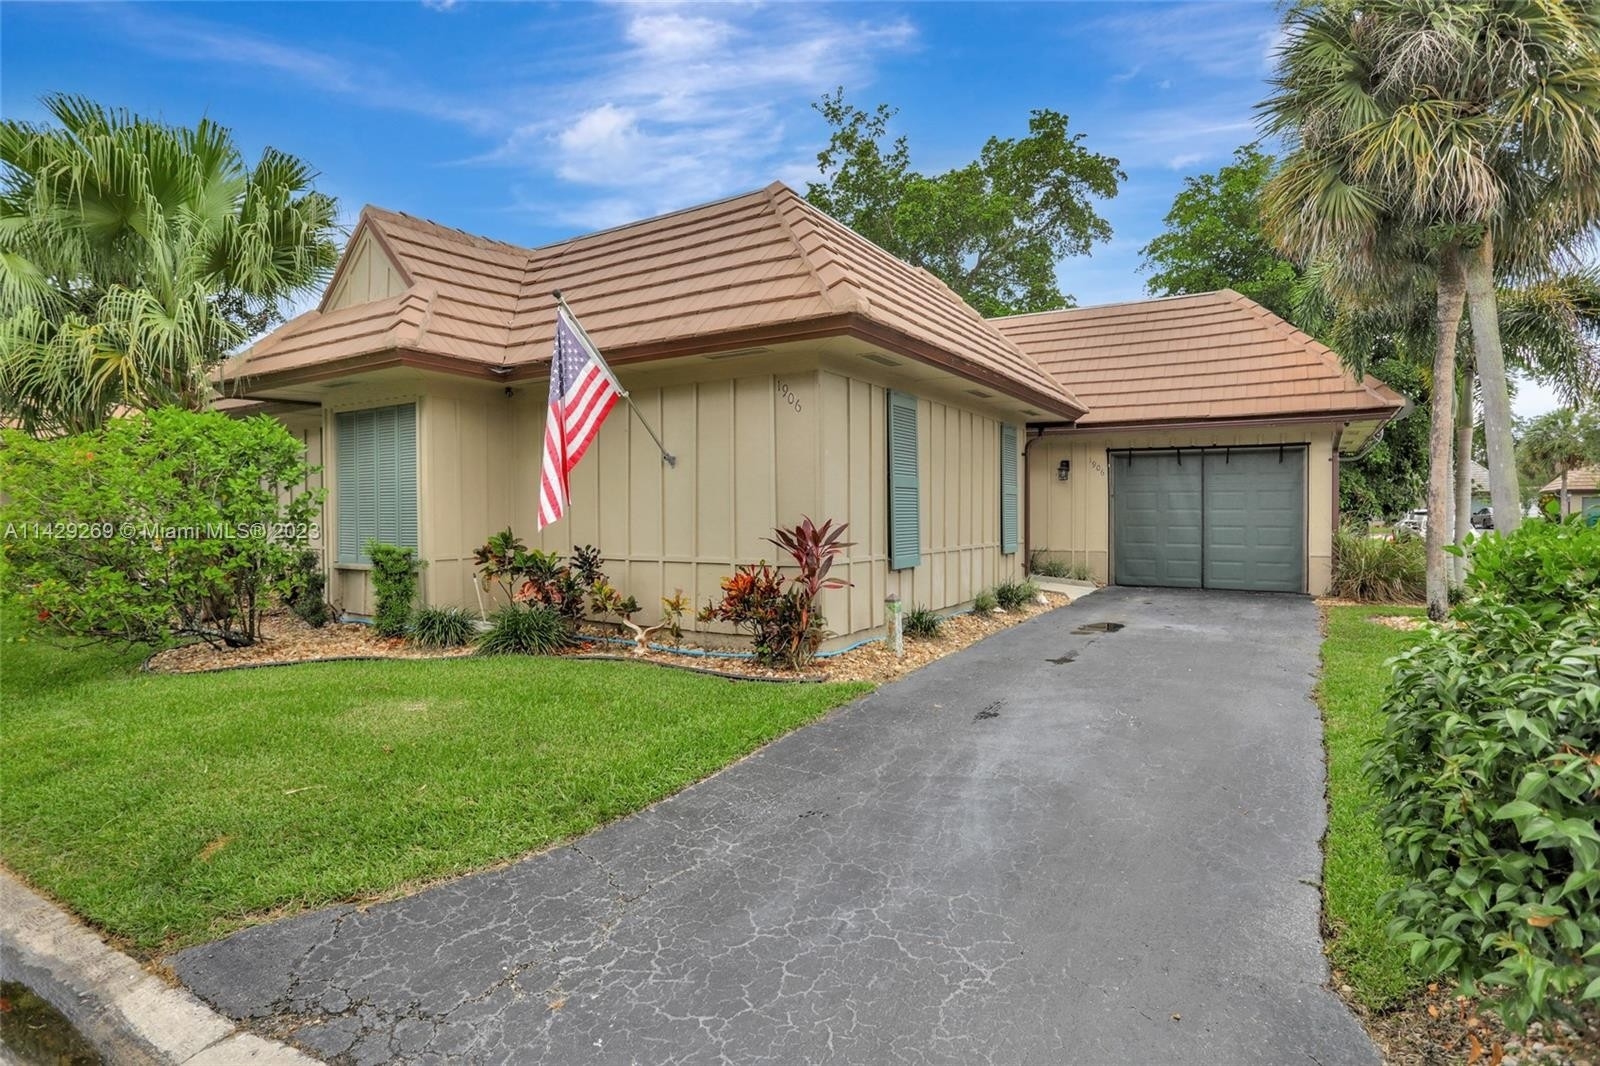 Single Family Home for Sale at Ramblewood South, Coral Springs, Florida 33071